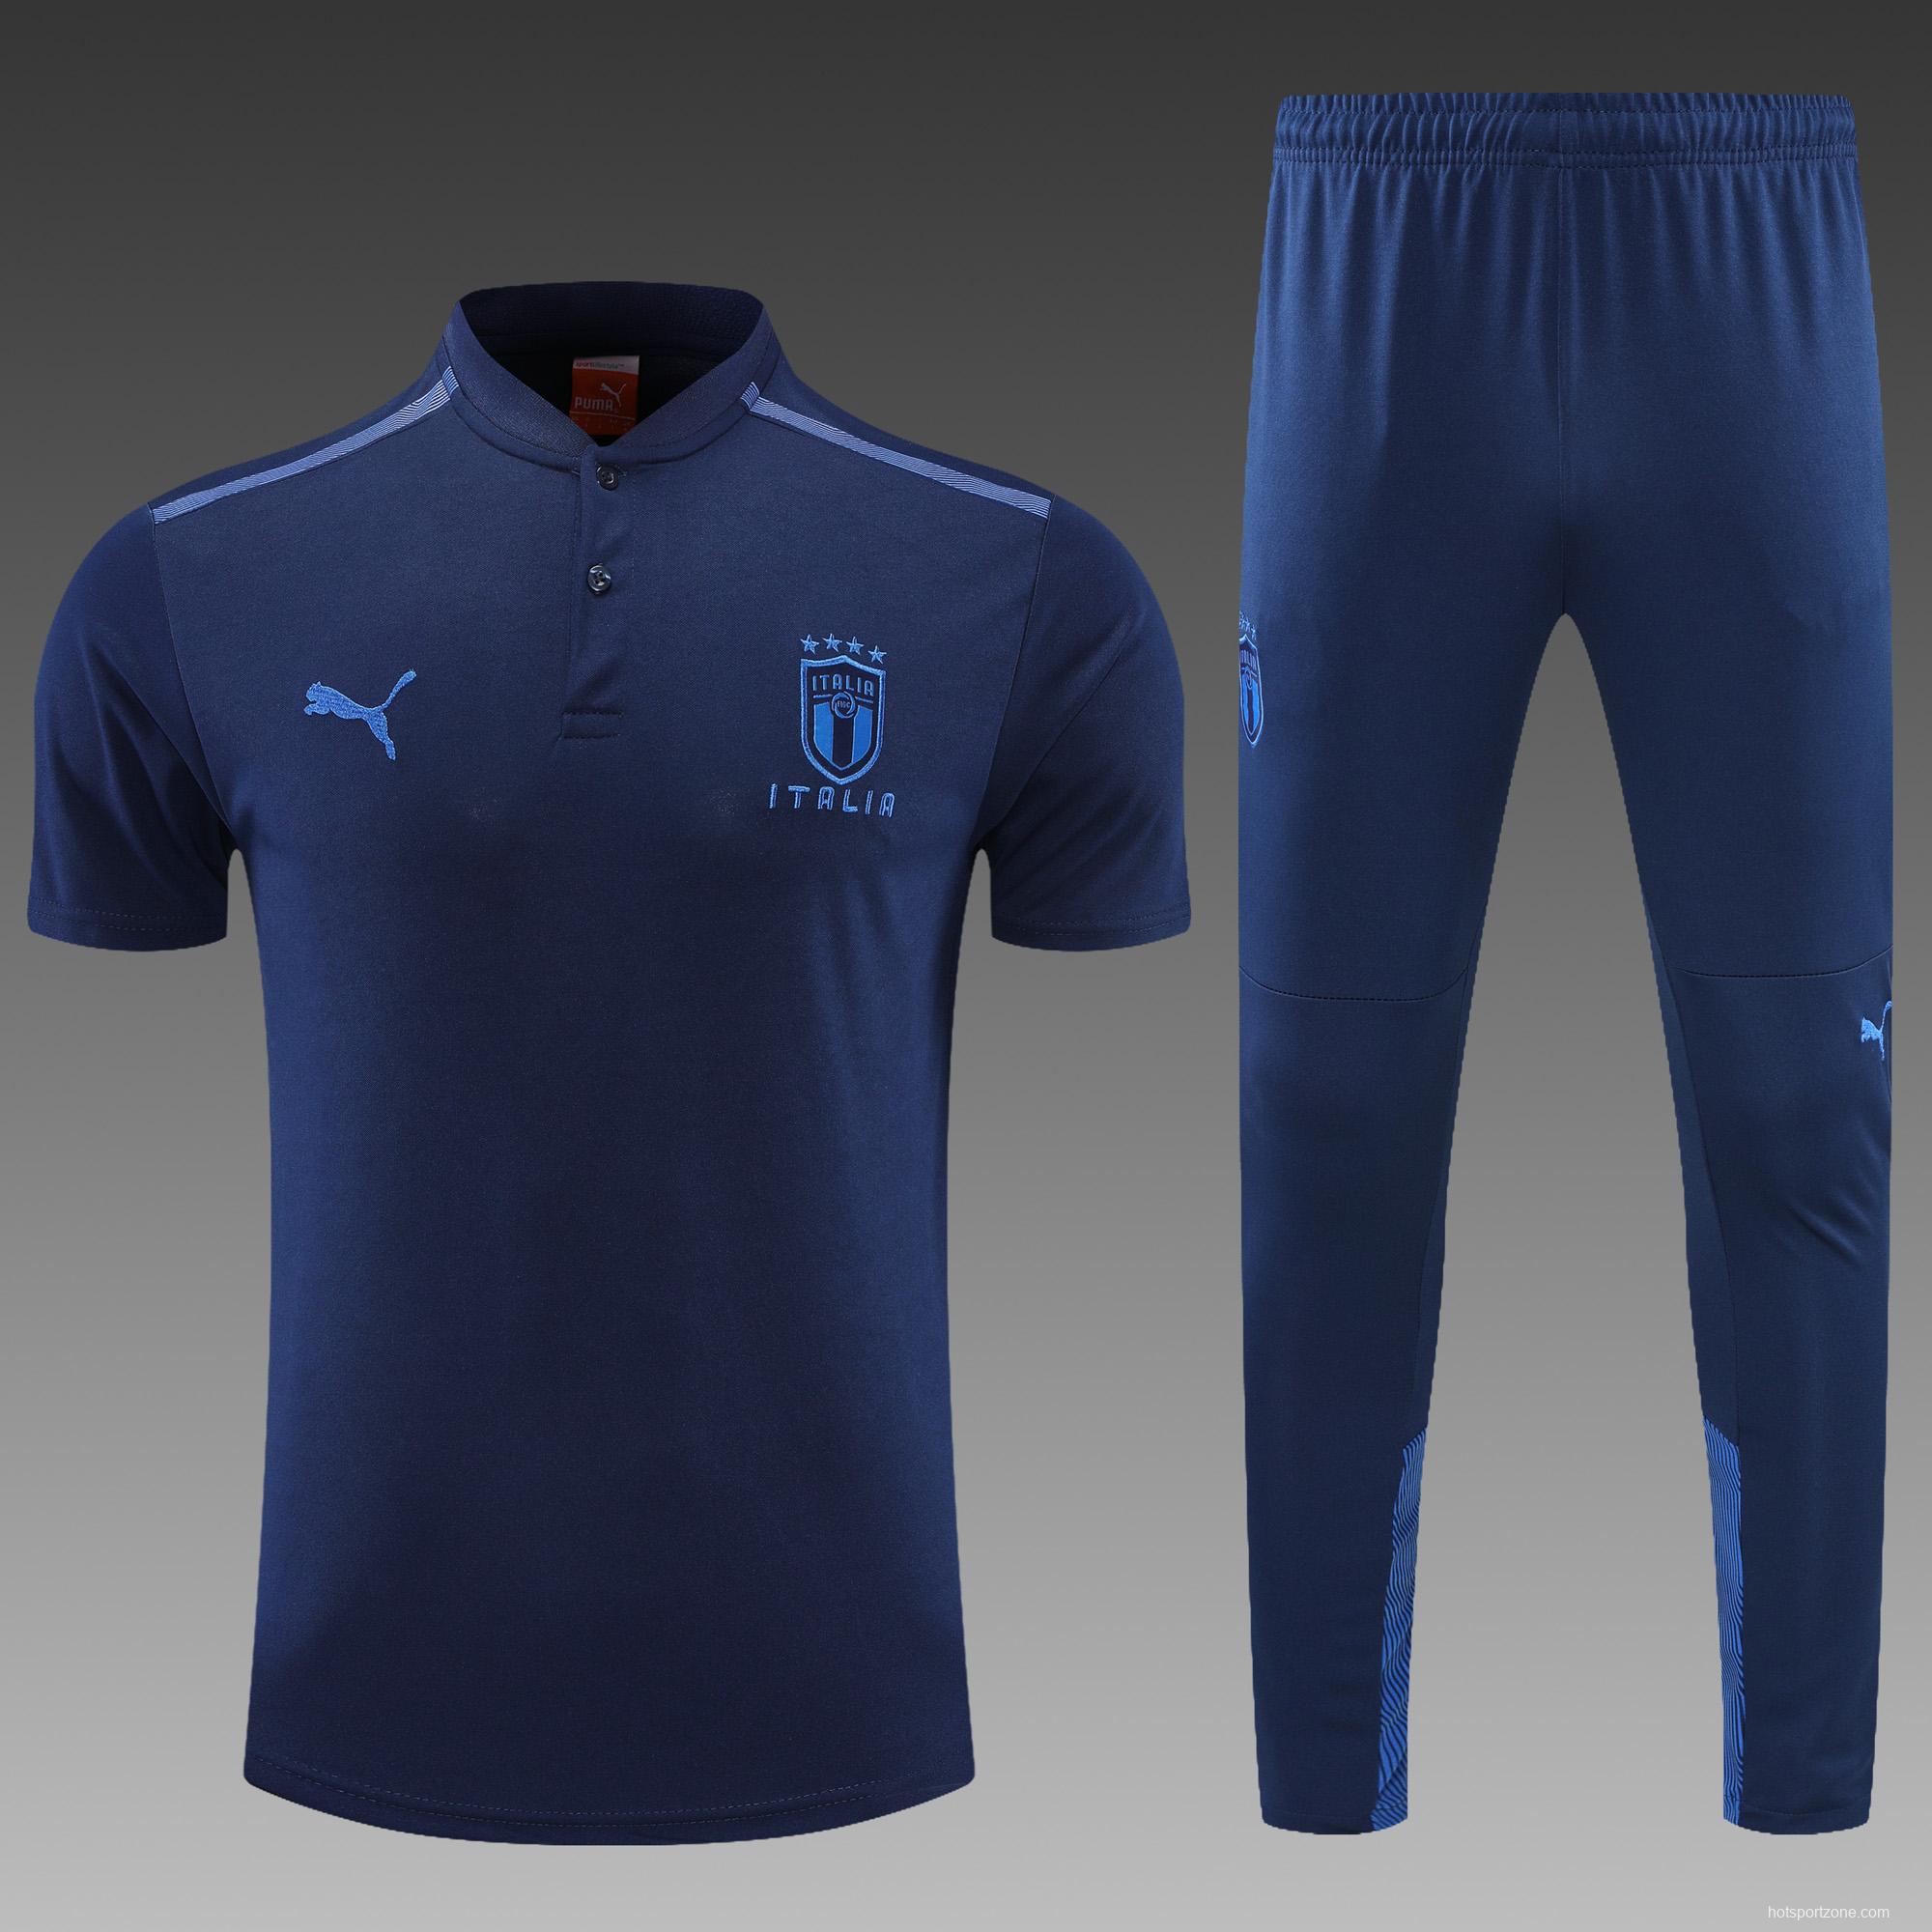 Italy POLO kit Royal Blue (not supported to be sold separately)